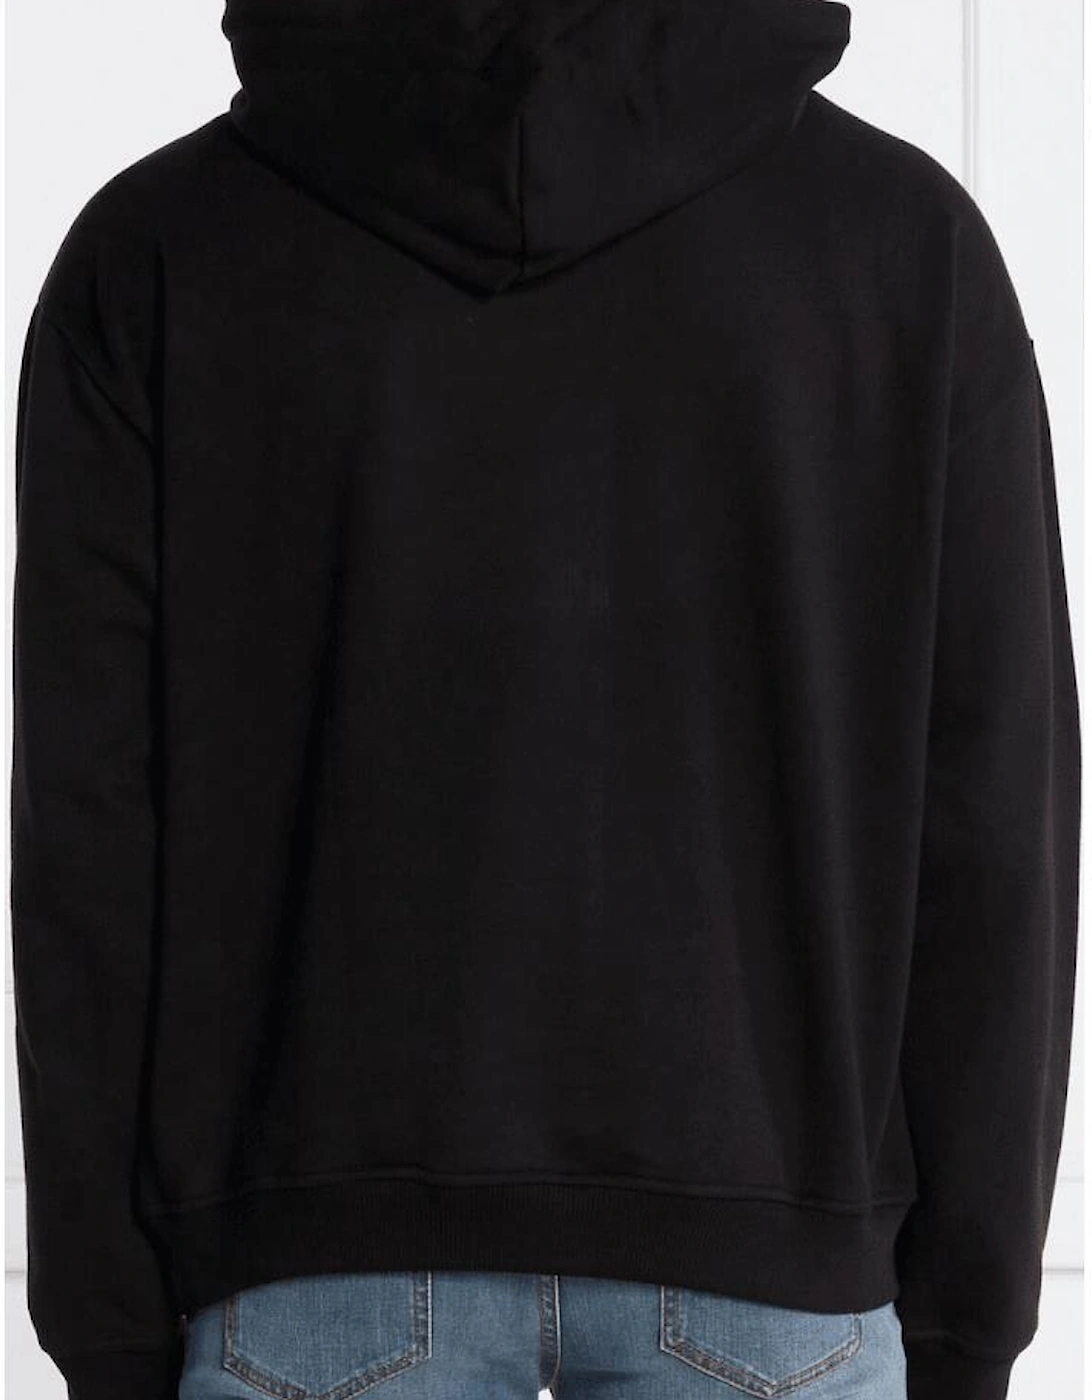 Embroidered Round Logo Pullover Black Hoodie